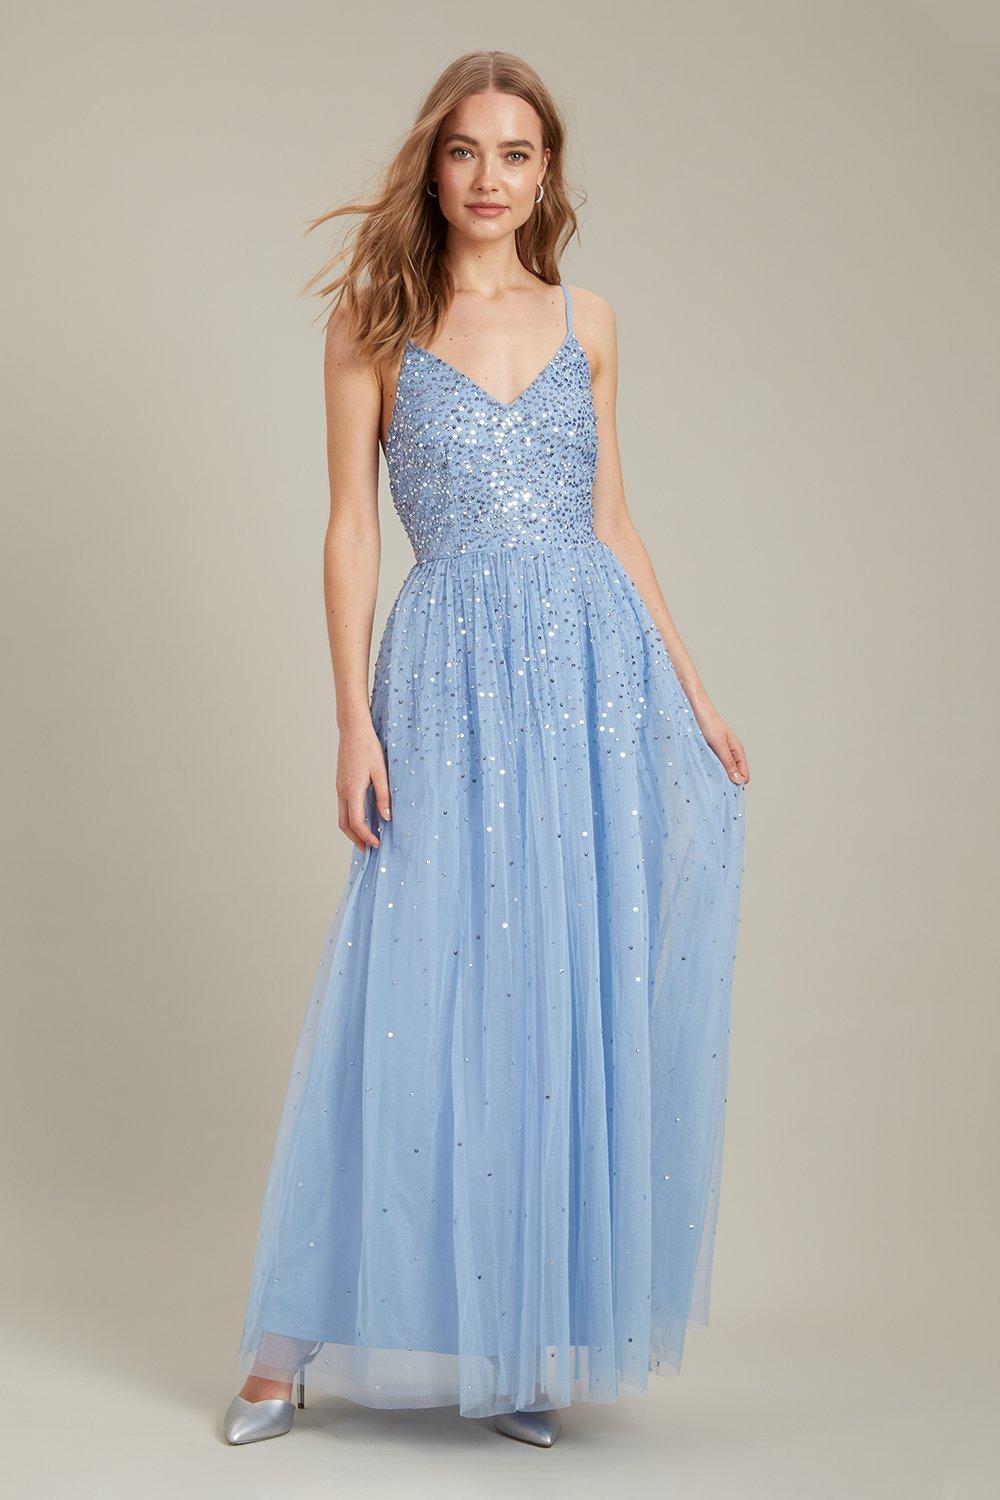 Women’s Embellished Strappy Tulle Maxi Dress - blue - 14